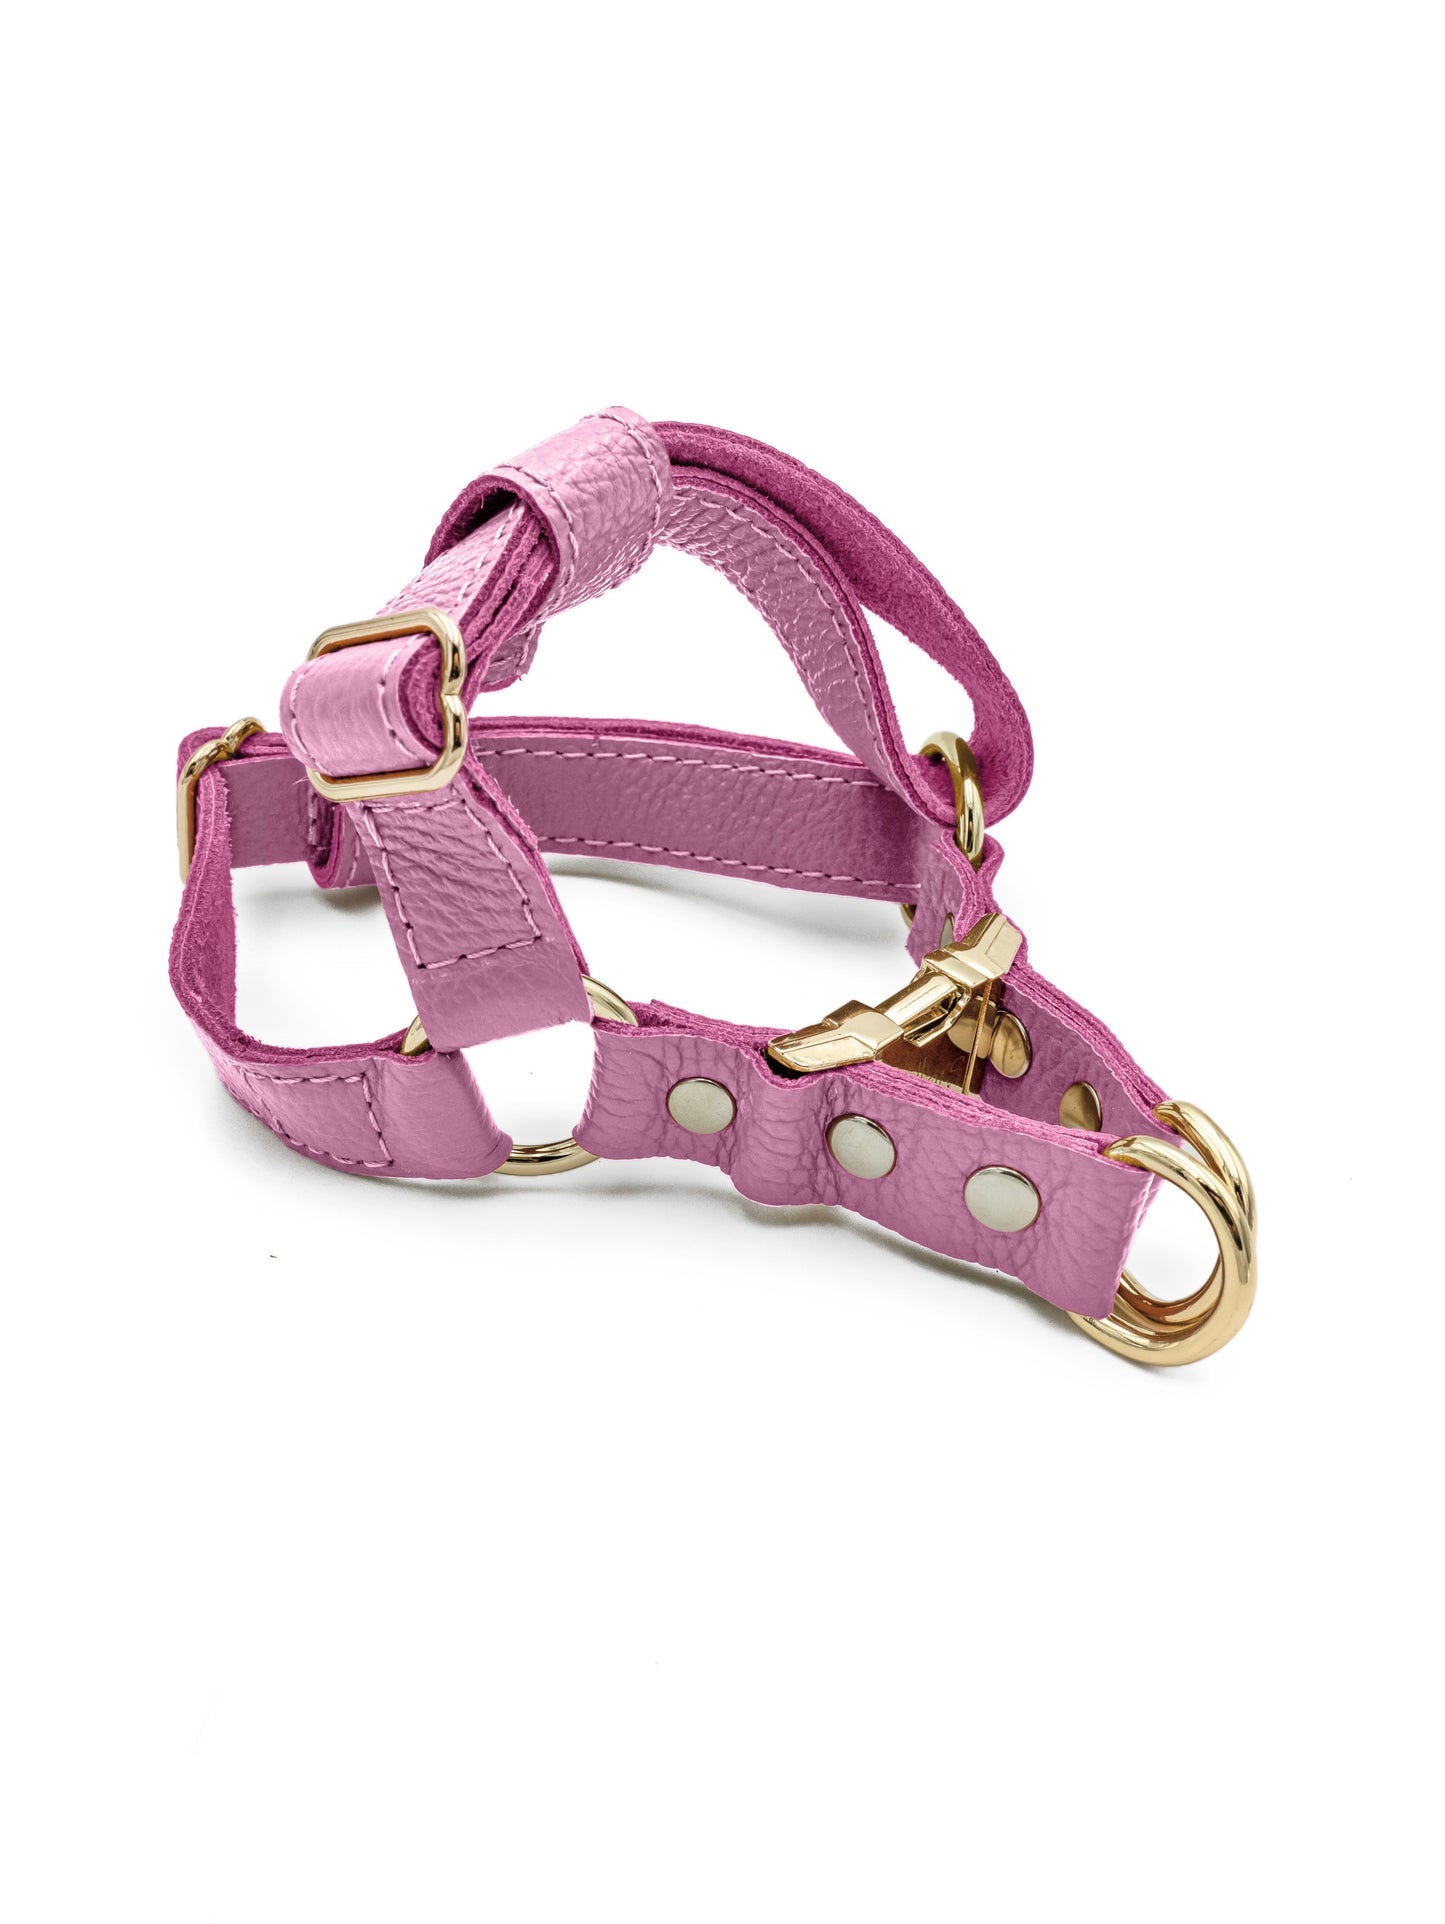 The Candy Harness